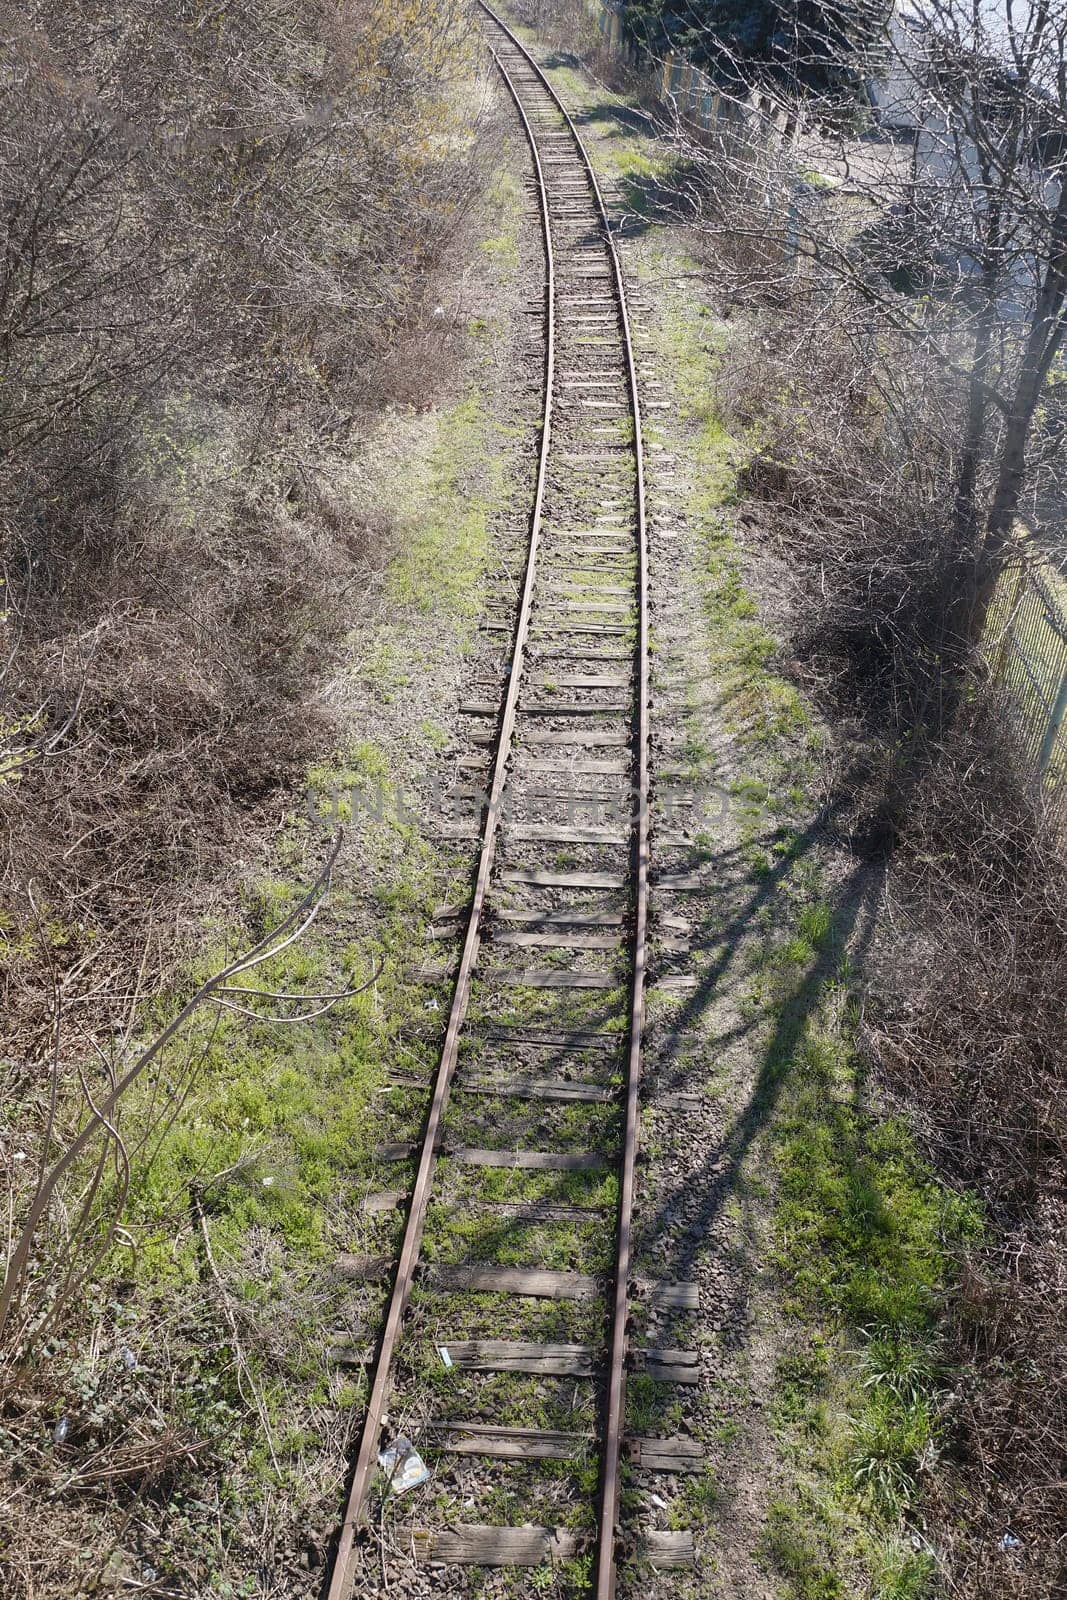 old empty railway, perspective view from above.